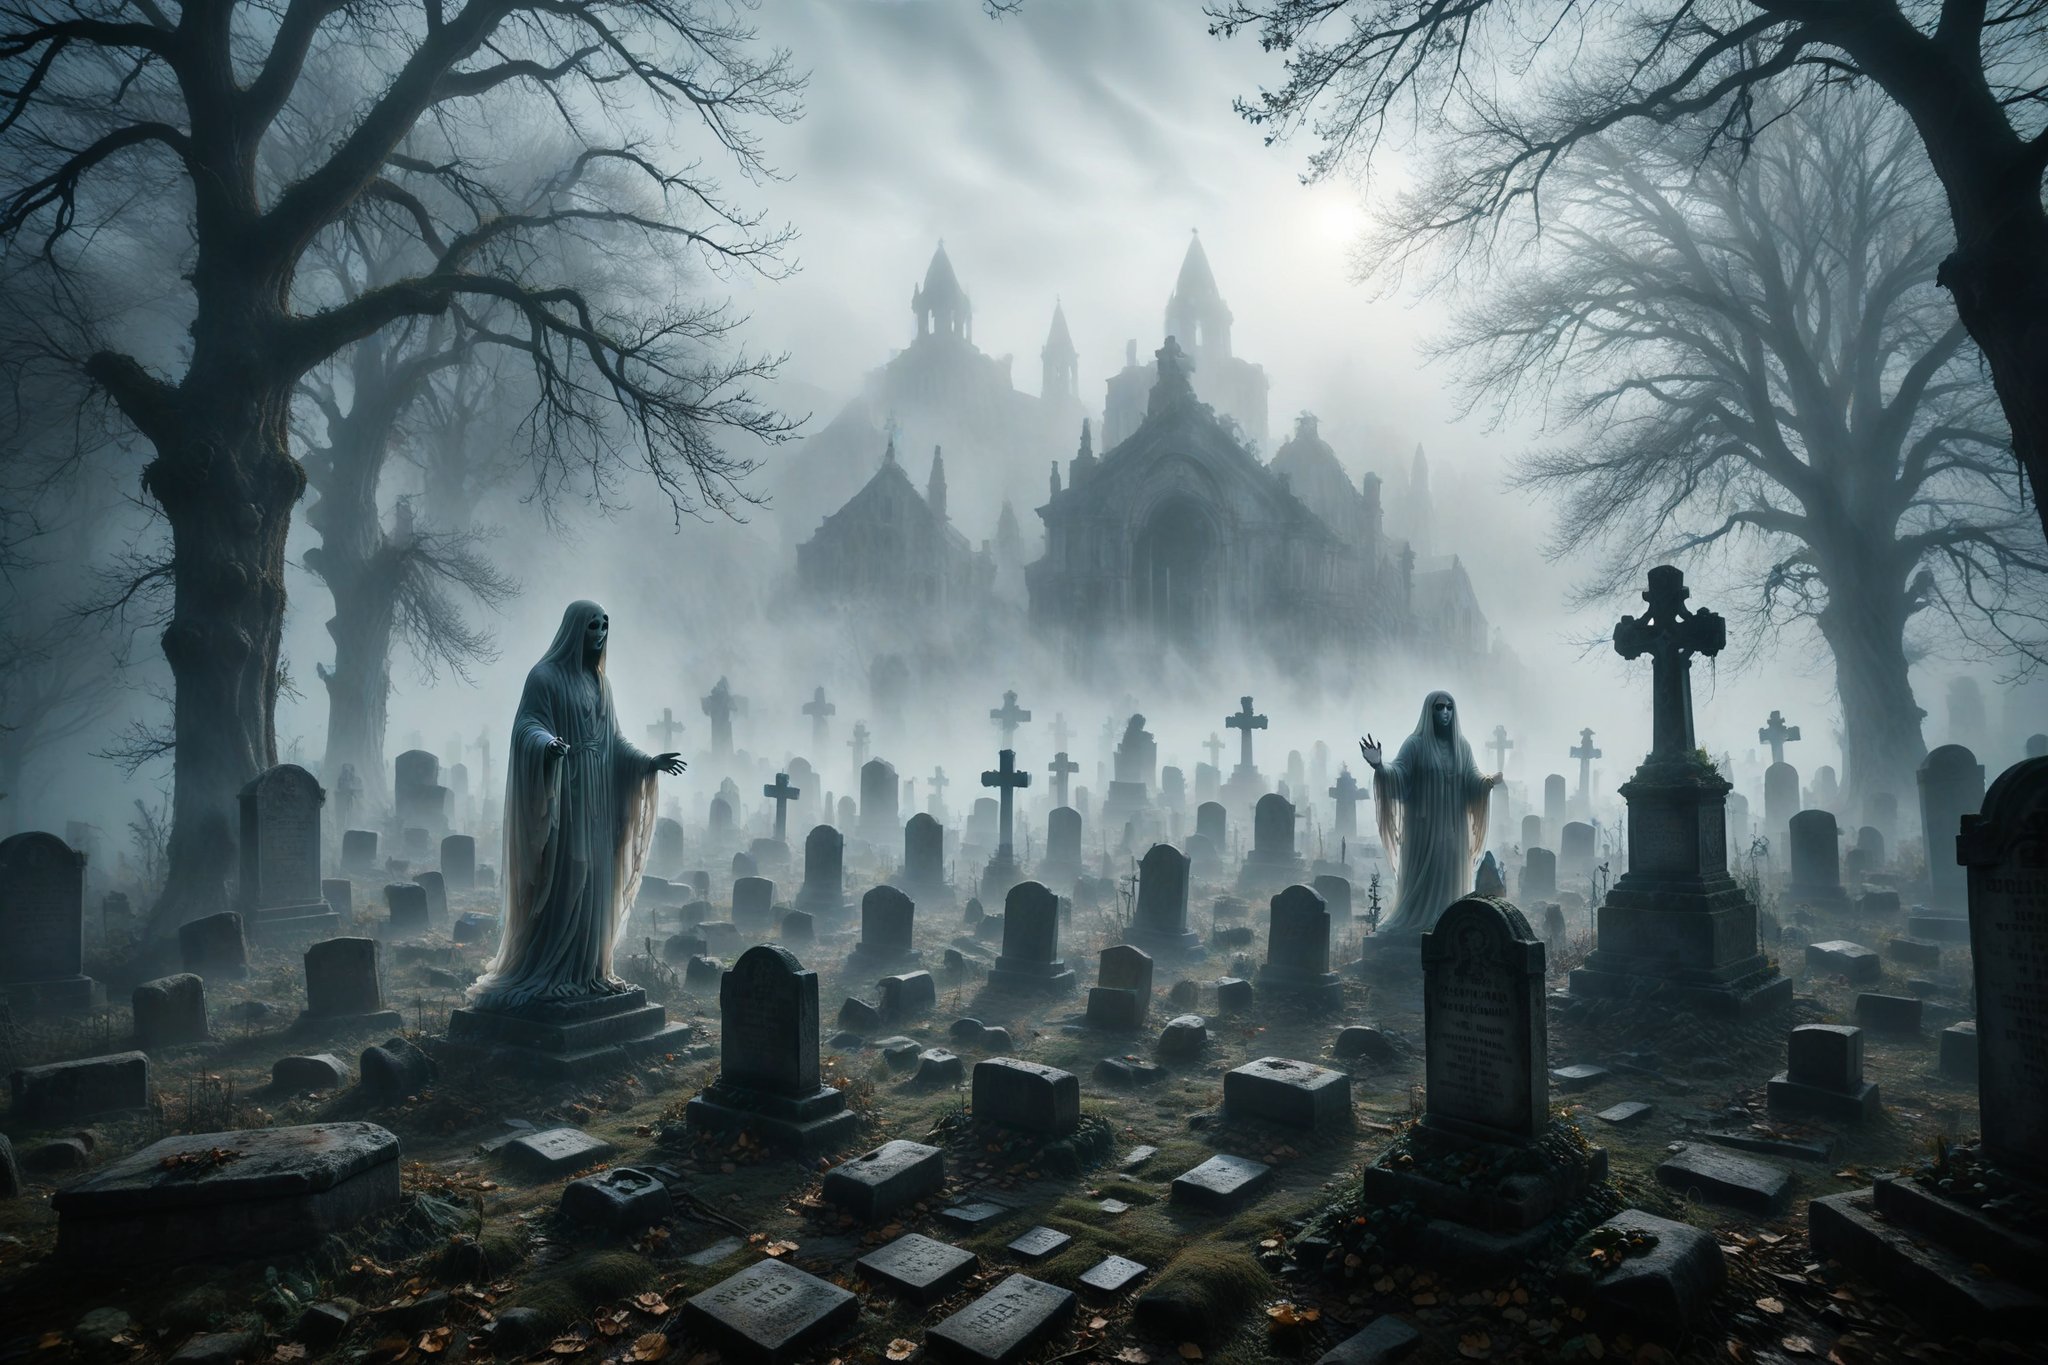 A translucent ghost drifting among ancient graves in a cemetery shrouded in thick fog.